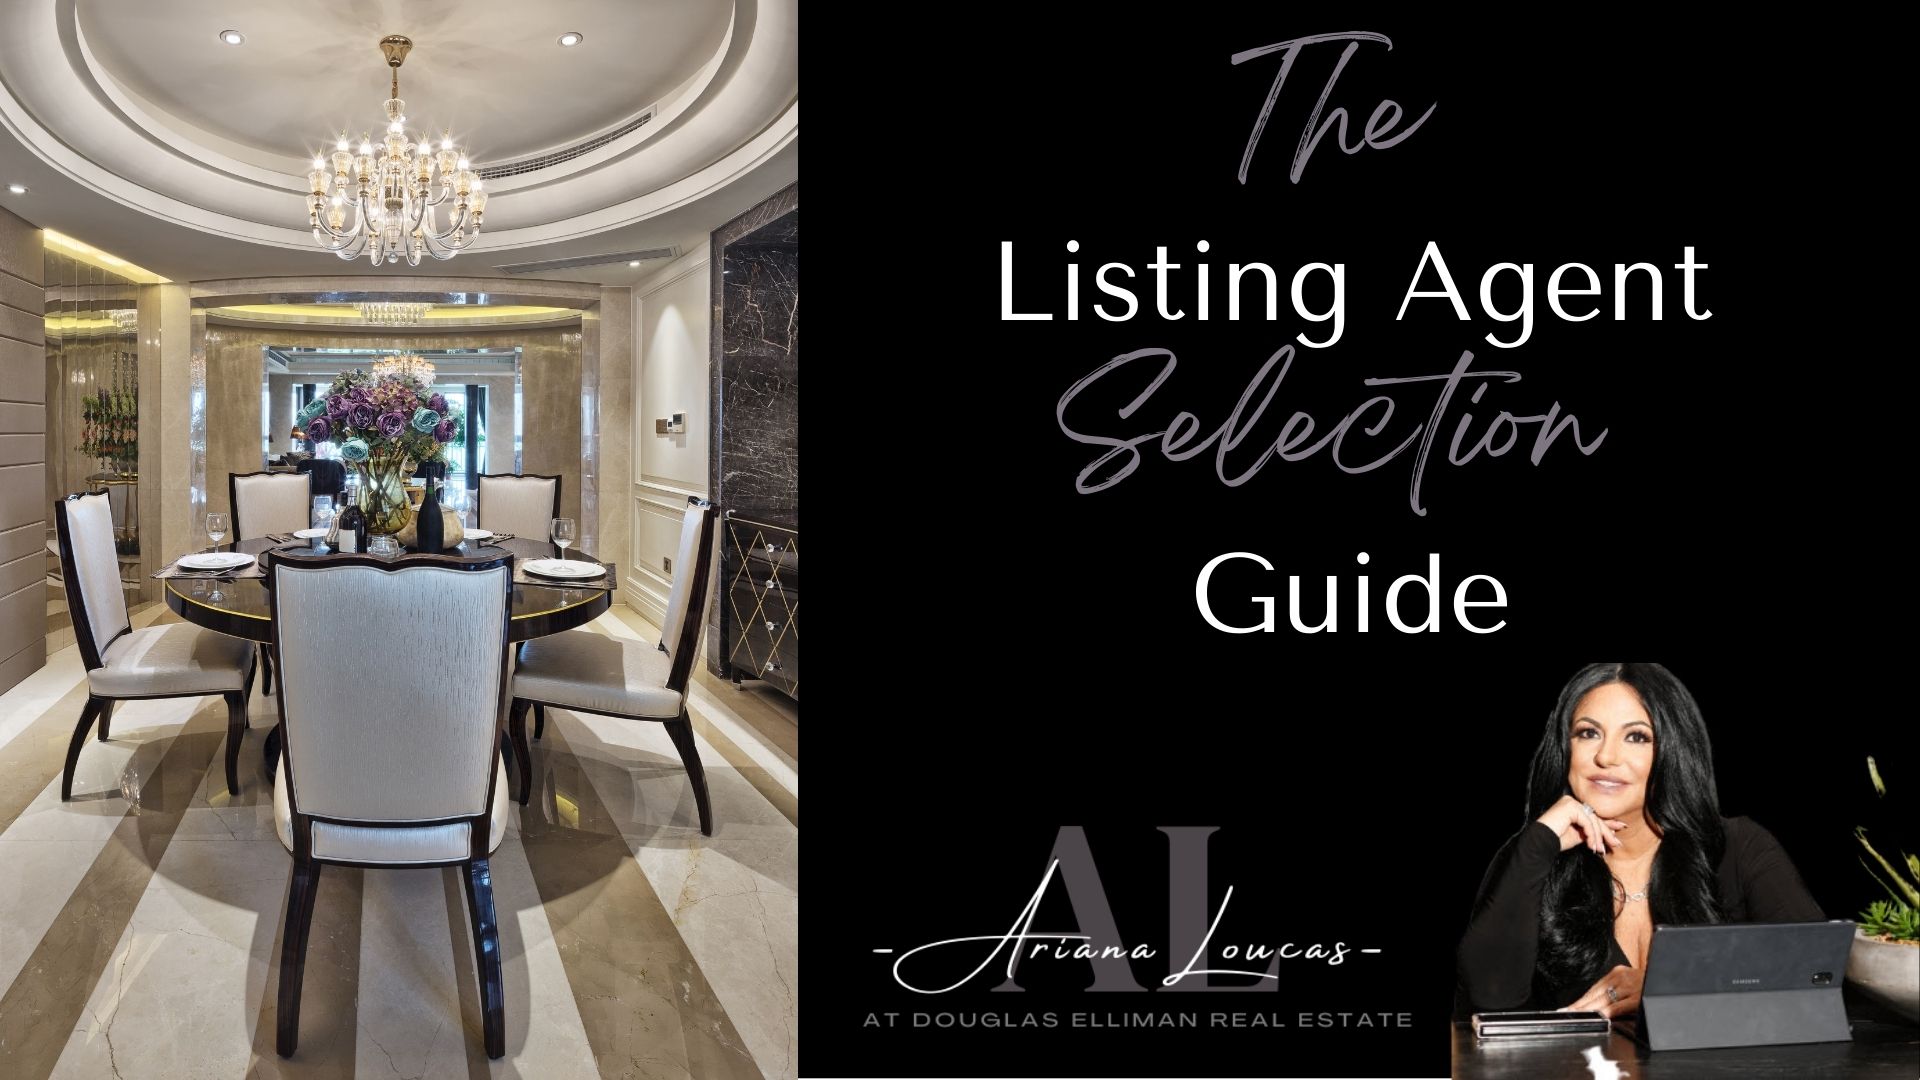 Sellers Agent Selection Guide